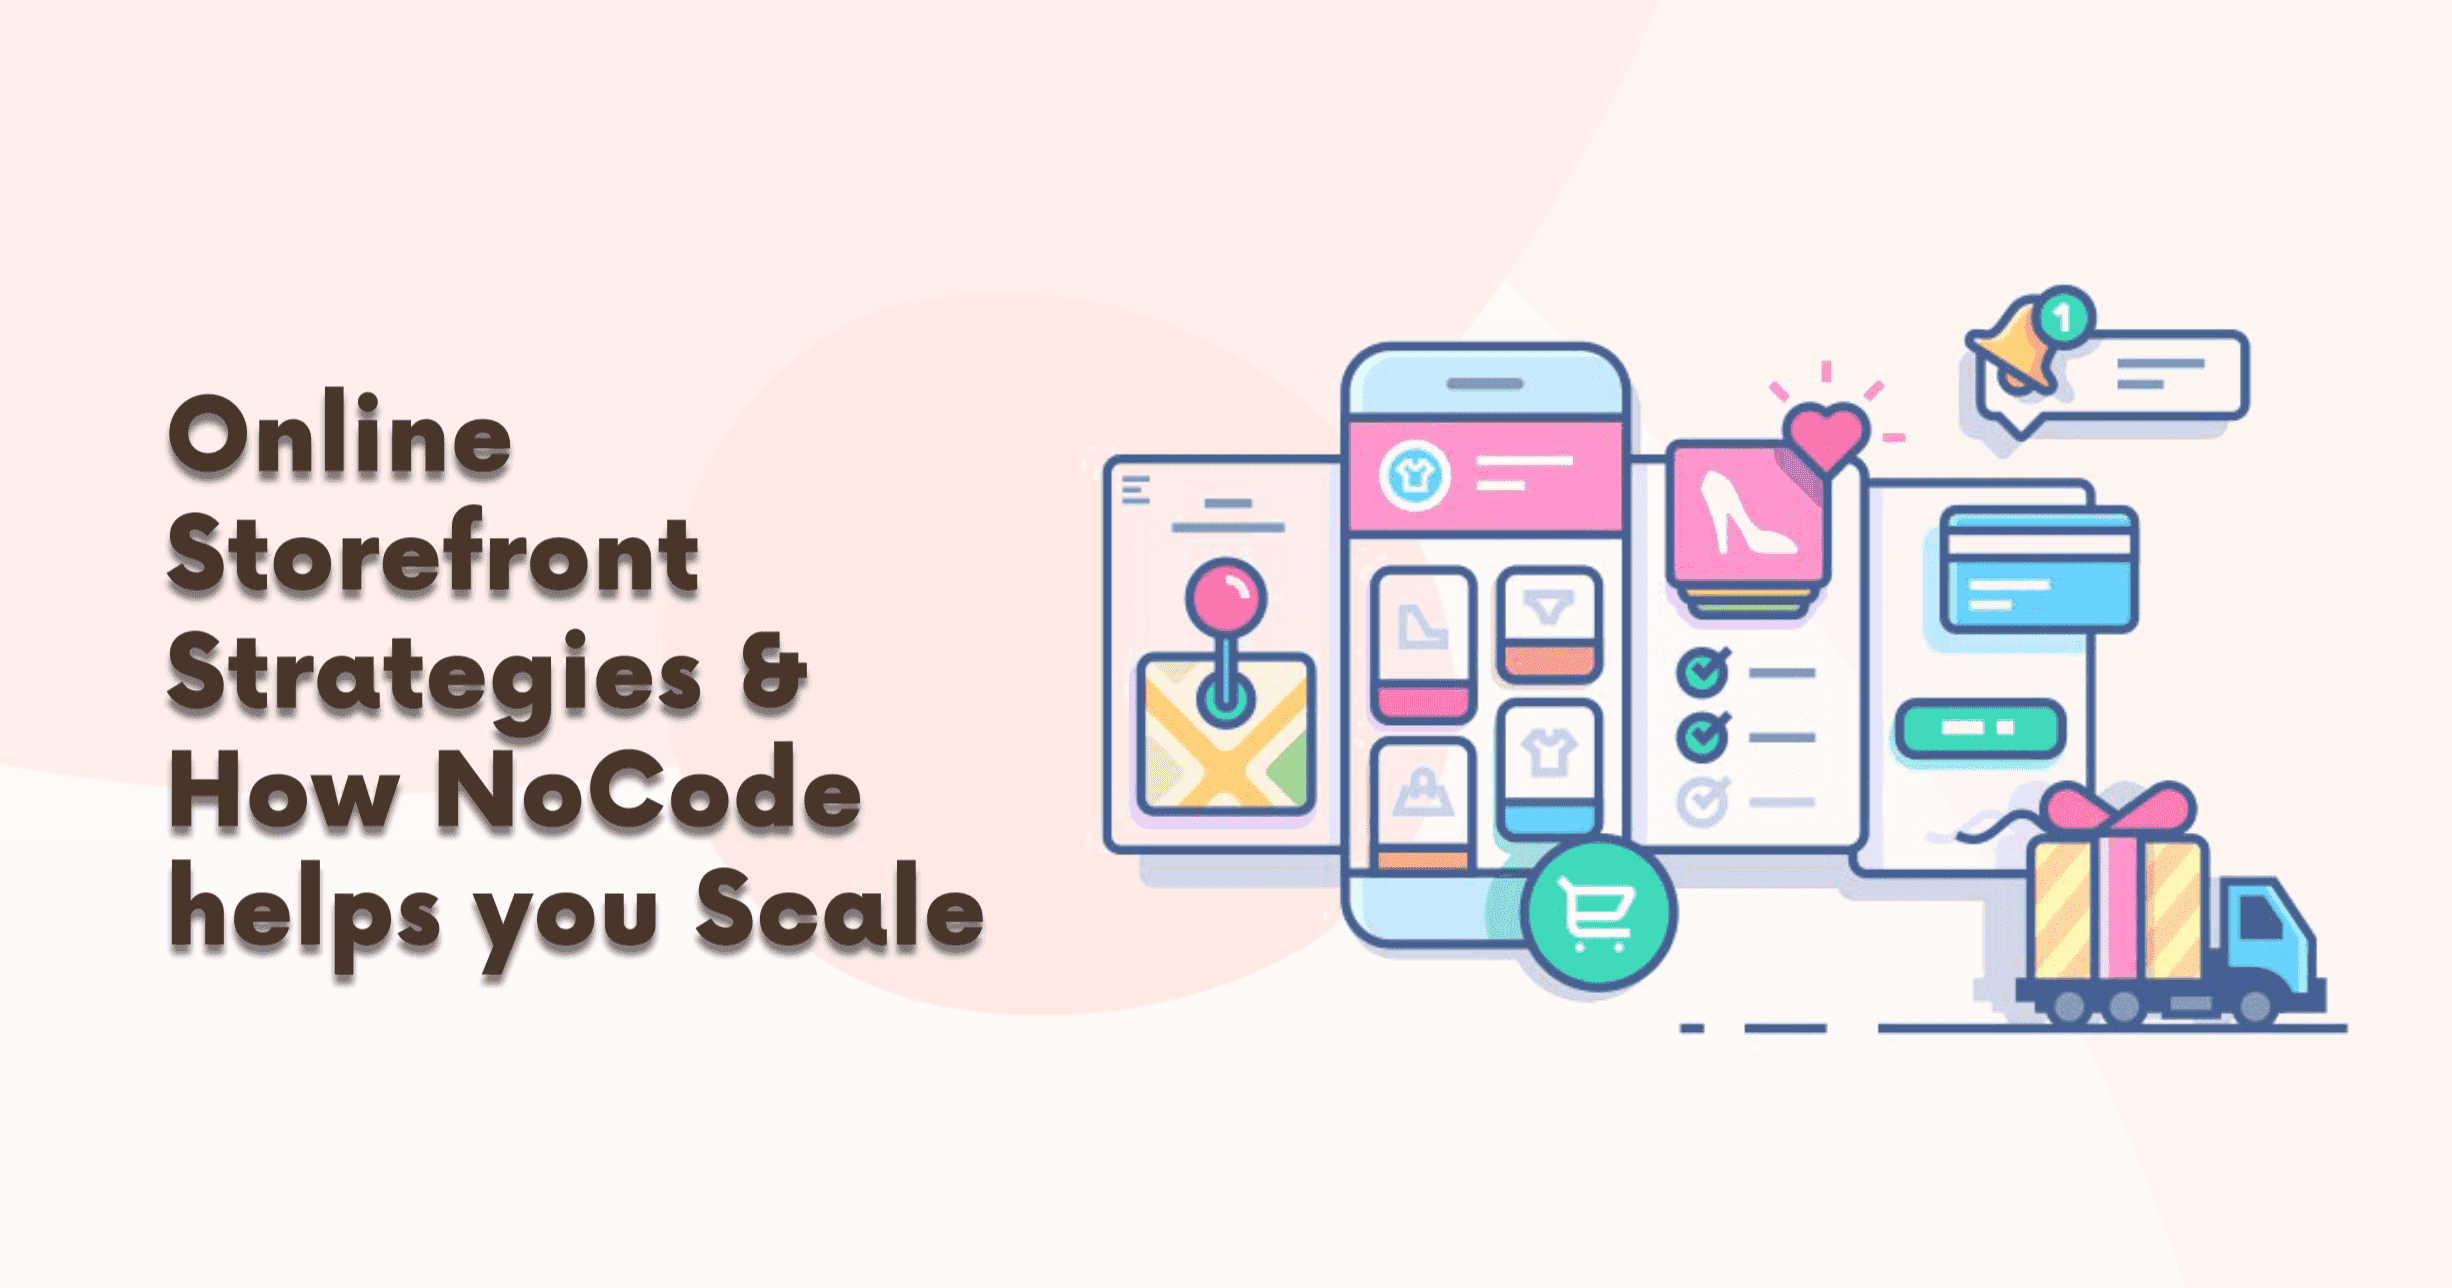 online-storefront-strategies-how-nocode-helps-you-scale-2